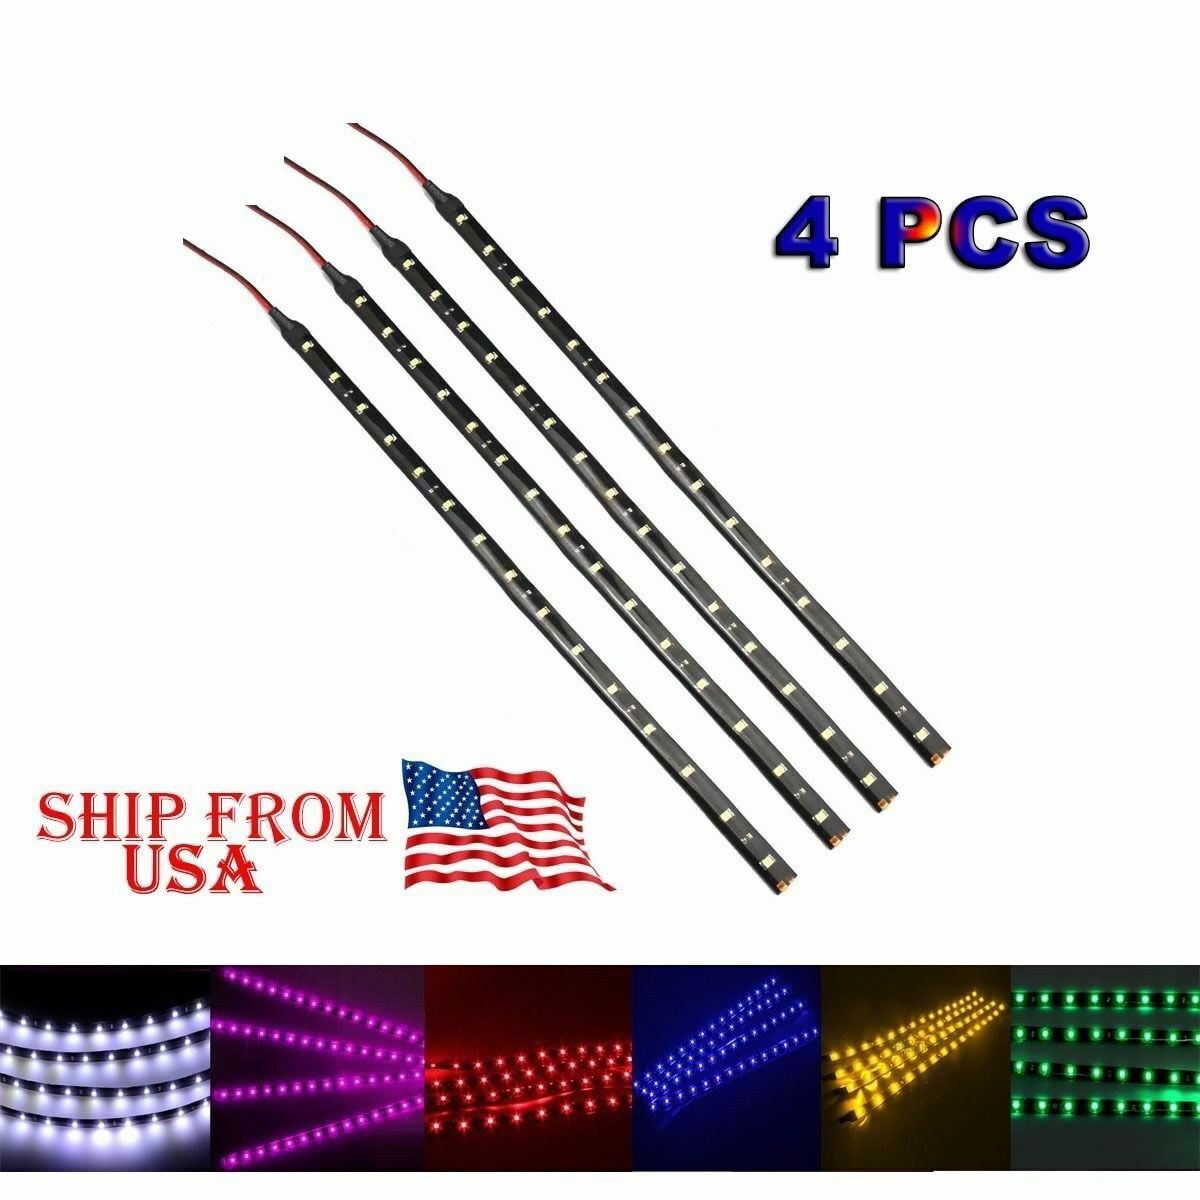 Details about   8 PCS 12V 12" Red 15SMD Flexible LED Strip Light Waterproof For Car Truck Boat 